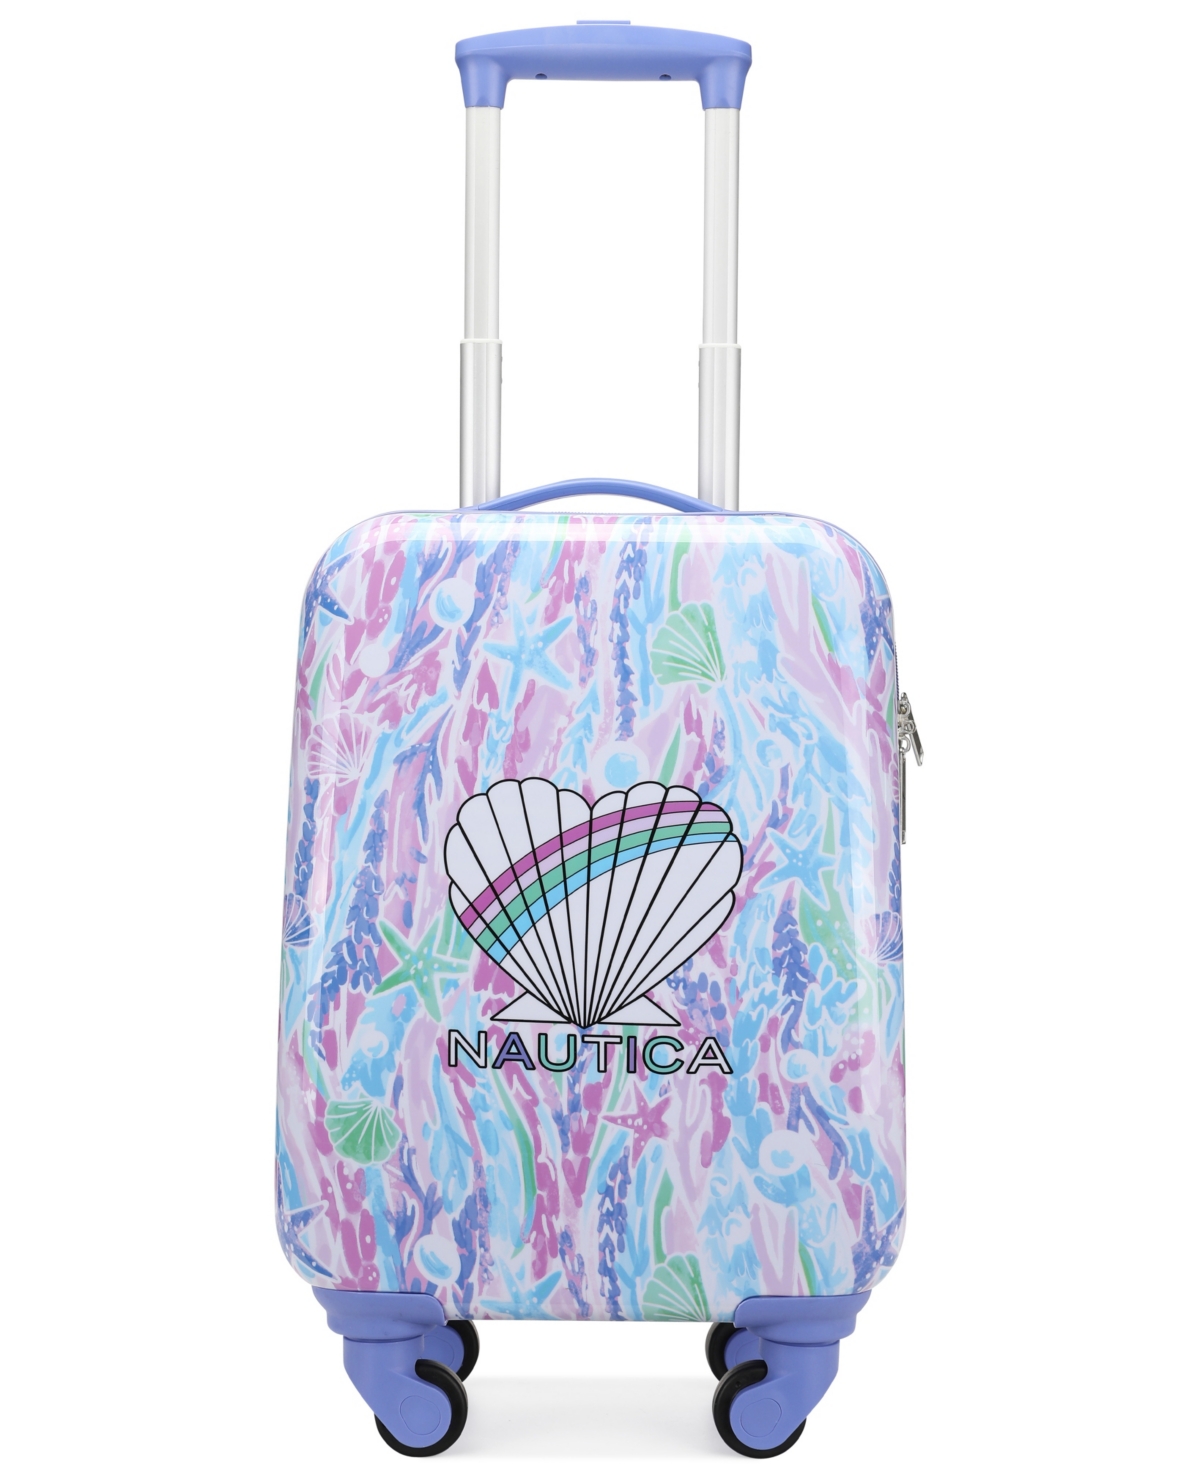 Nautica Kids 18" Airline Approved Carry-on Suitcase In Blue